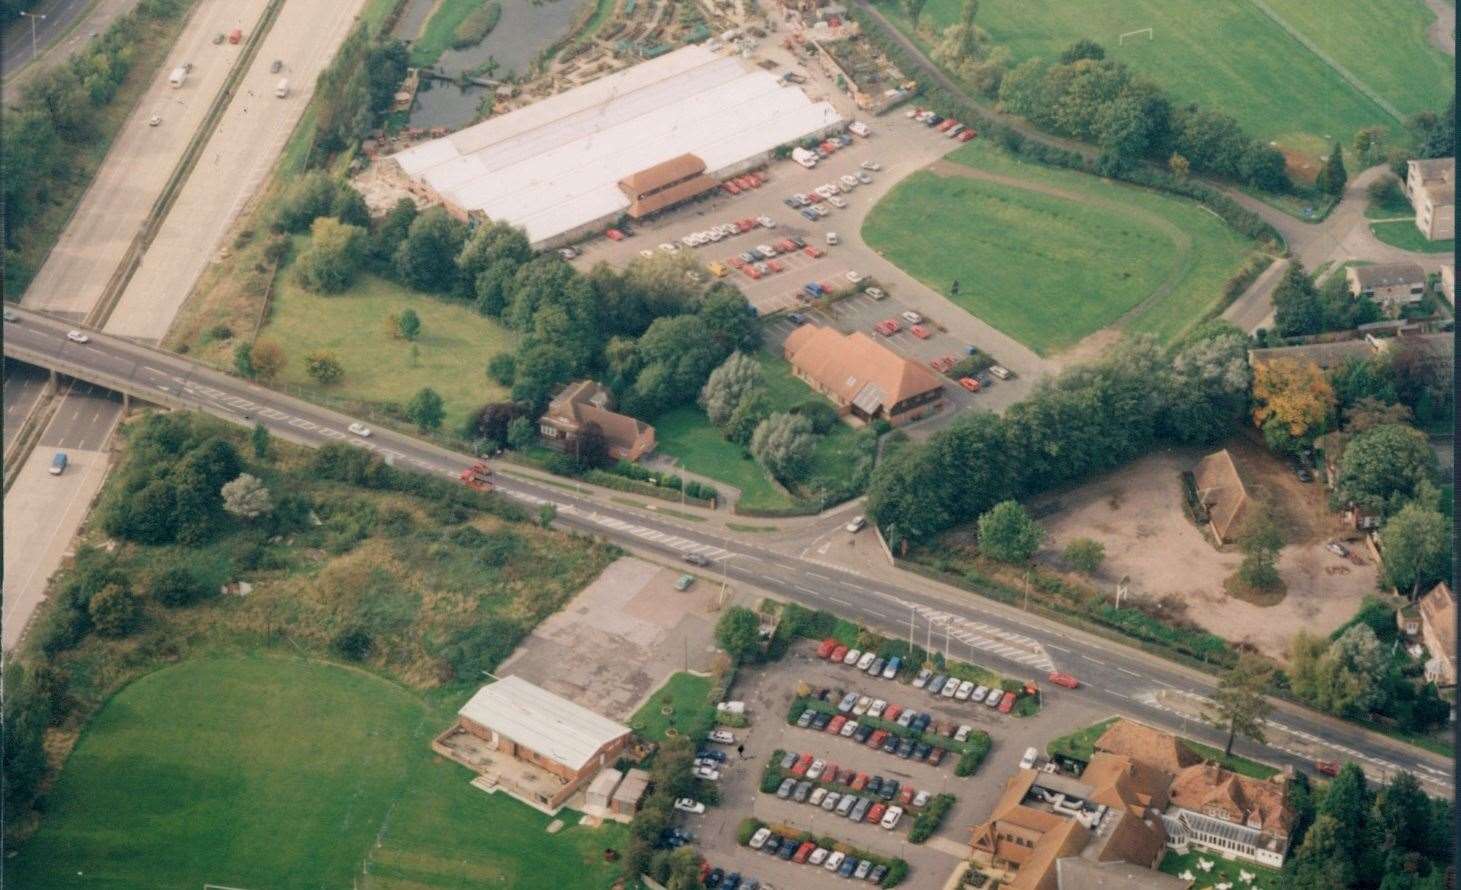 An aerial view of the site taken in 1990 shows the junction of Cemetery Lane and Canterbury Road with the Longacres garden centre at the back. The old barn on the right became Harvester in 1997. Picture: Steve Salter